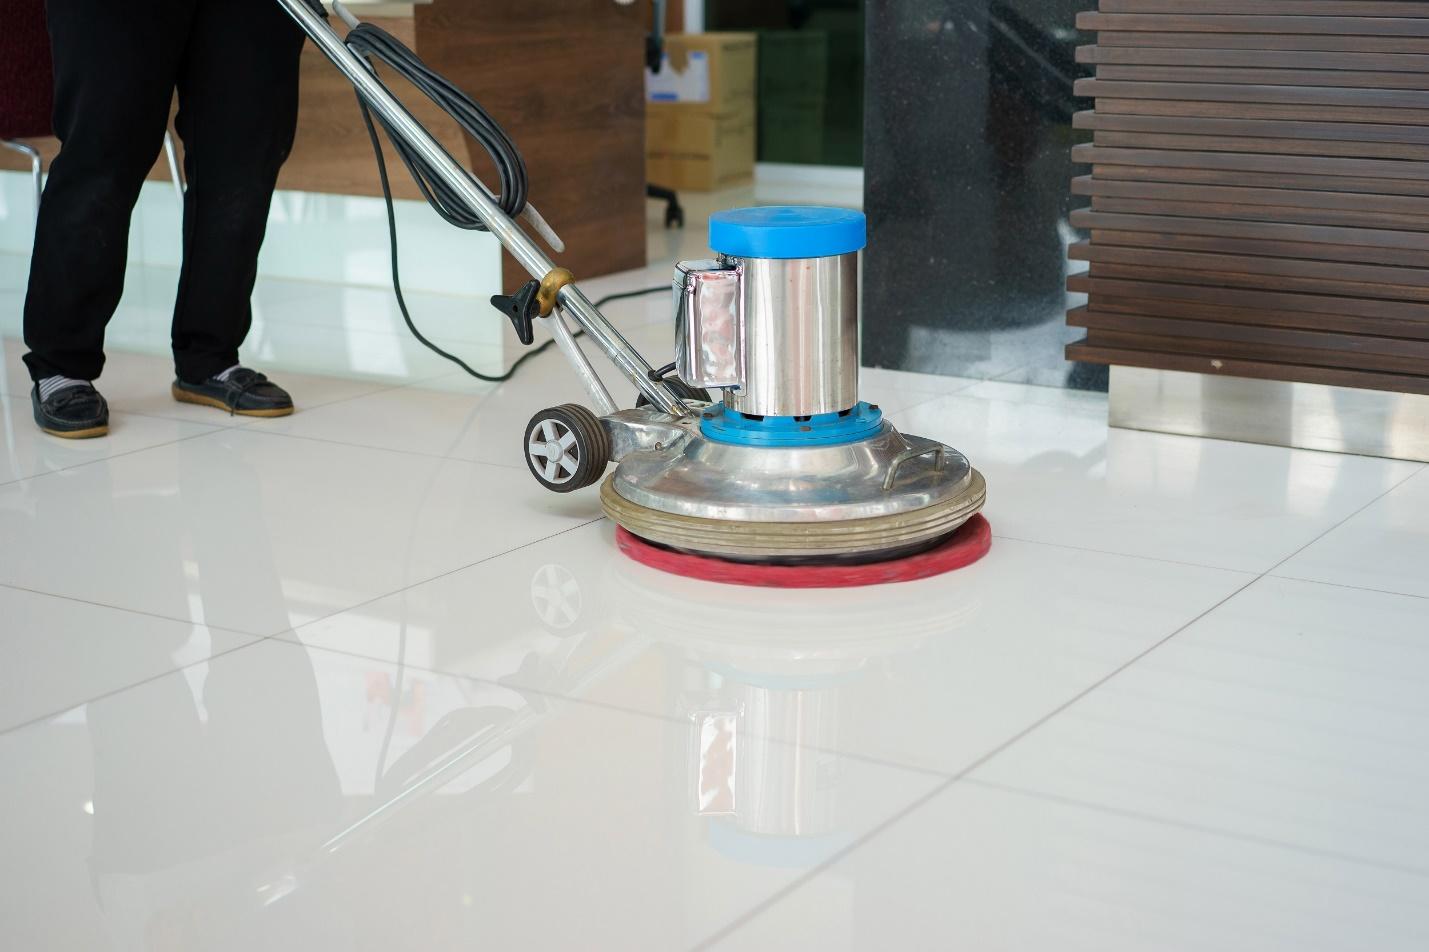 Grout Cleaning Service